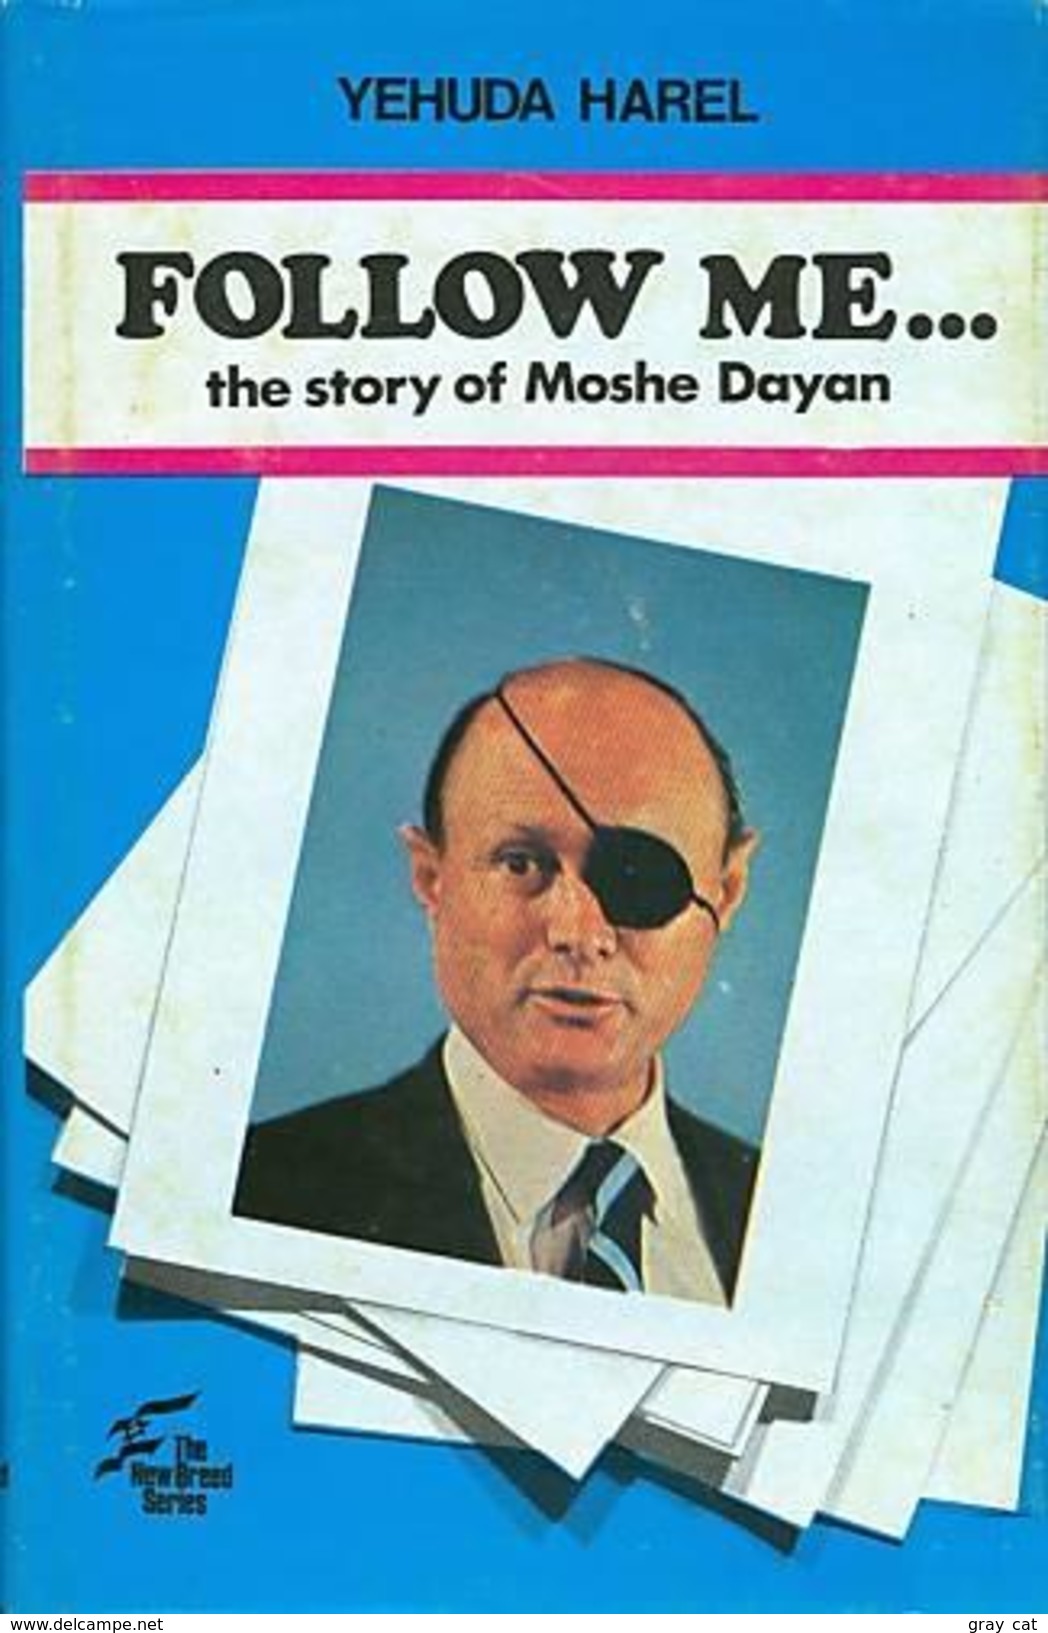 Follow Me: The Story Of Moshe Dayan By Yehuda Harel - Midden-Oosten